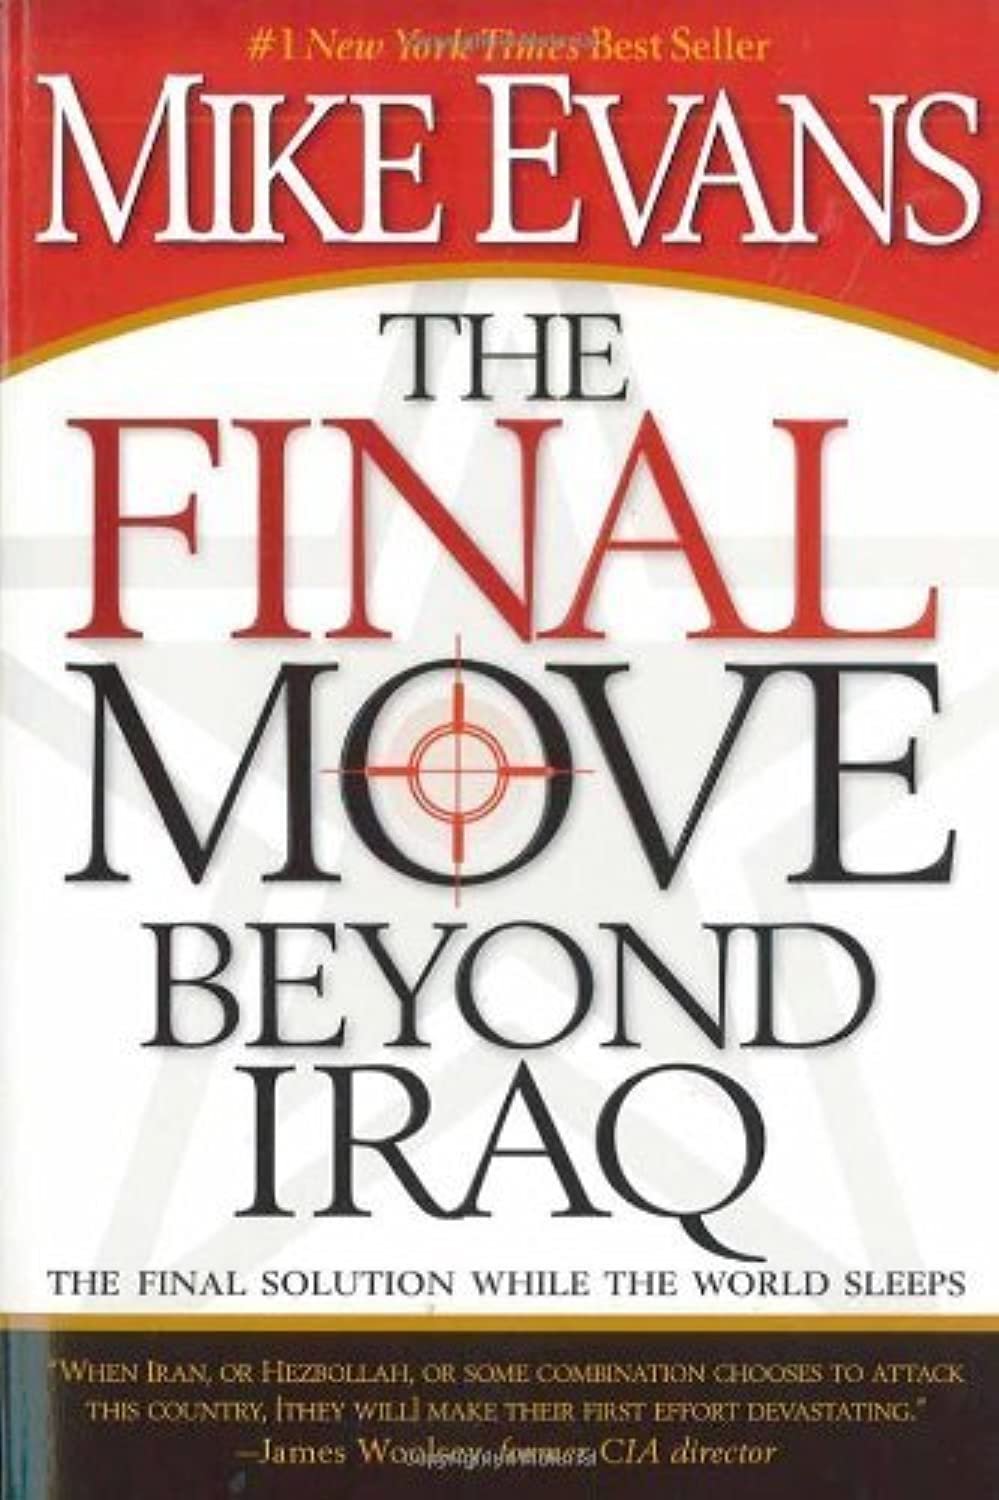 FINAL MOVE BEYOND IRAQ by Mike Evans (2007) Paperback